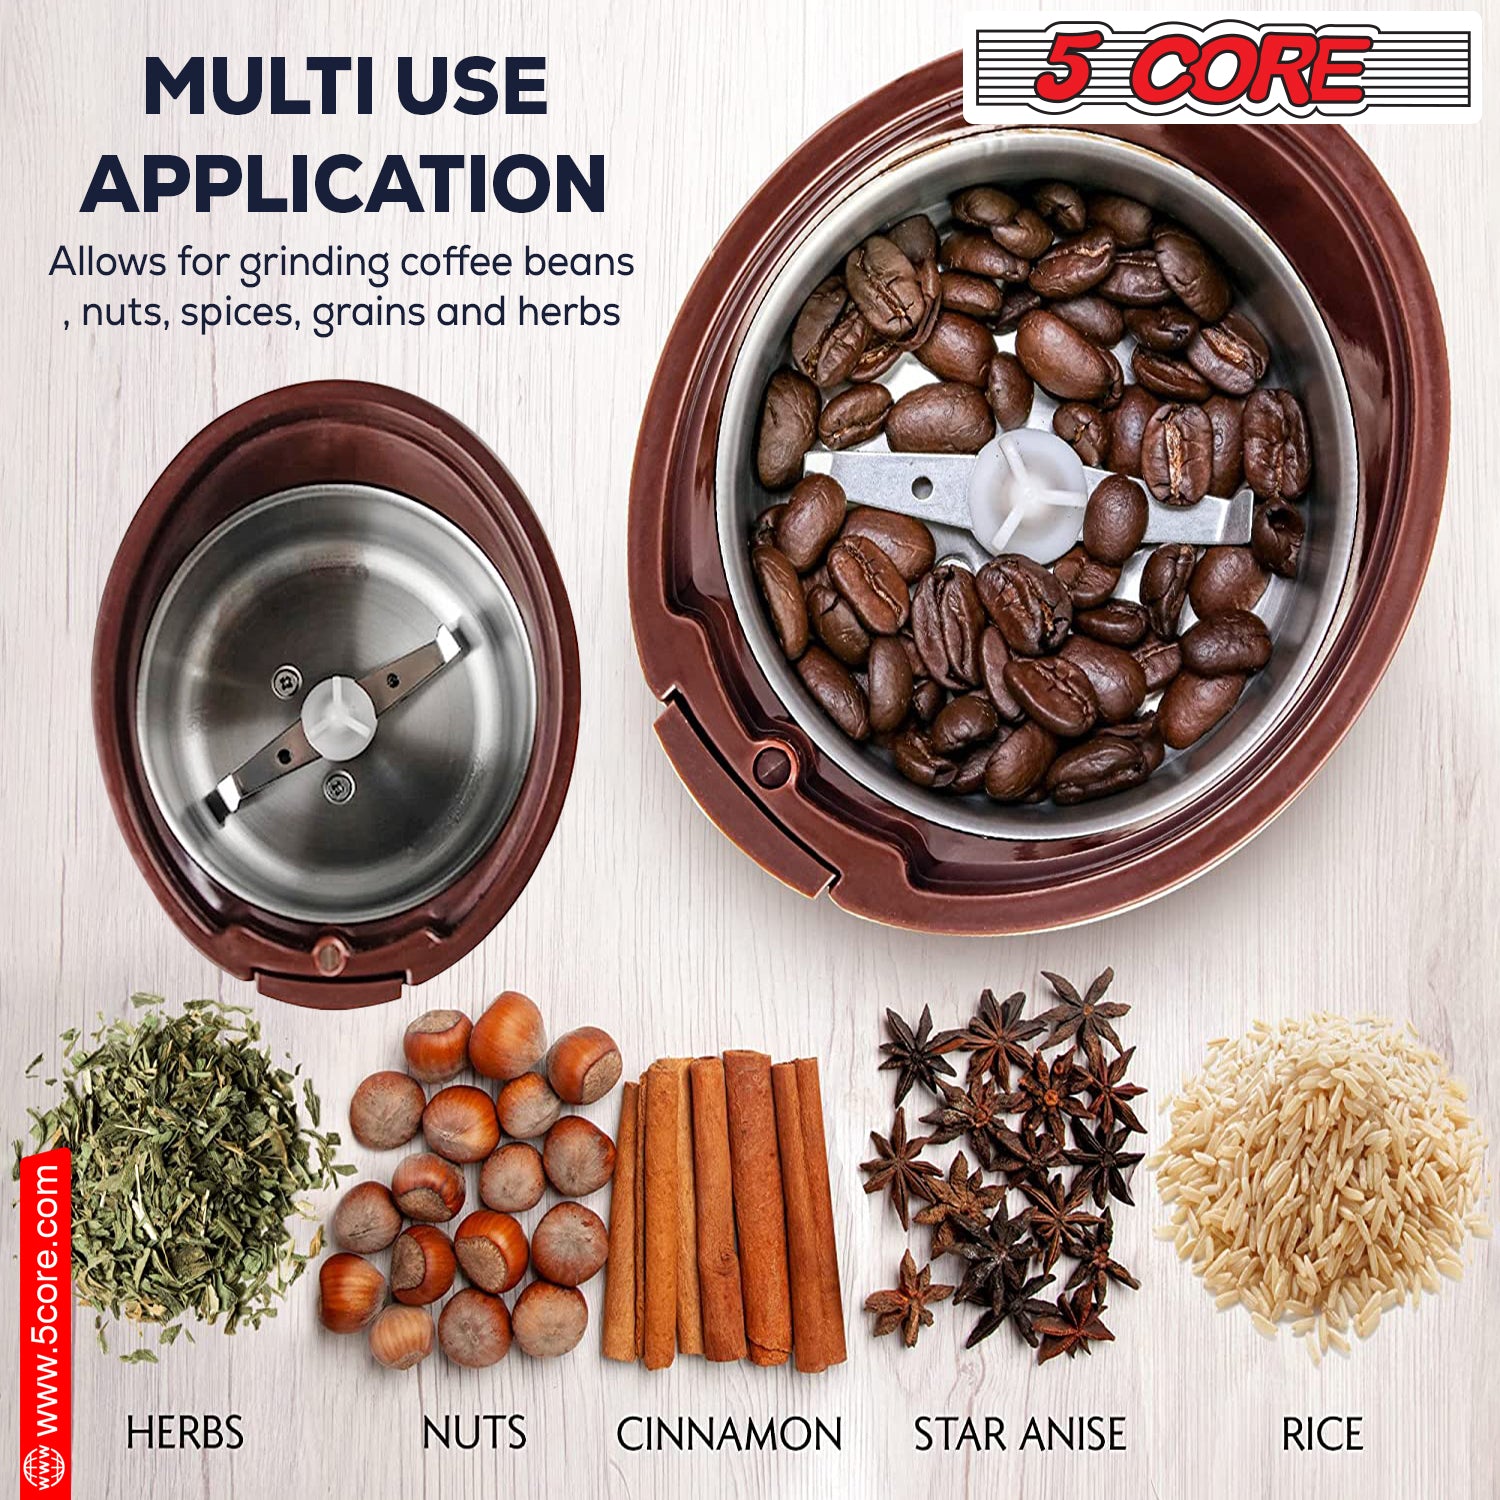 5 Core’s Efficient Spice and Coffee Grinding Solution: 150W, 85 Gram Grinder in Brown